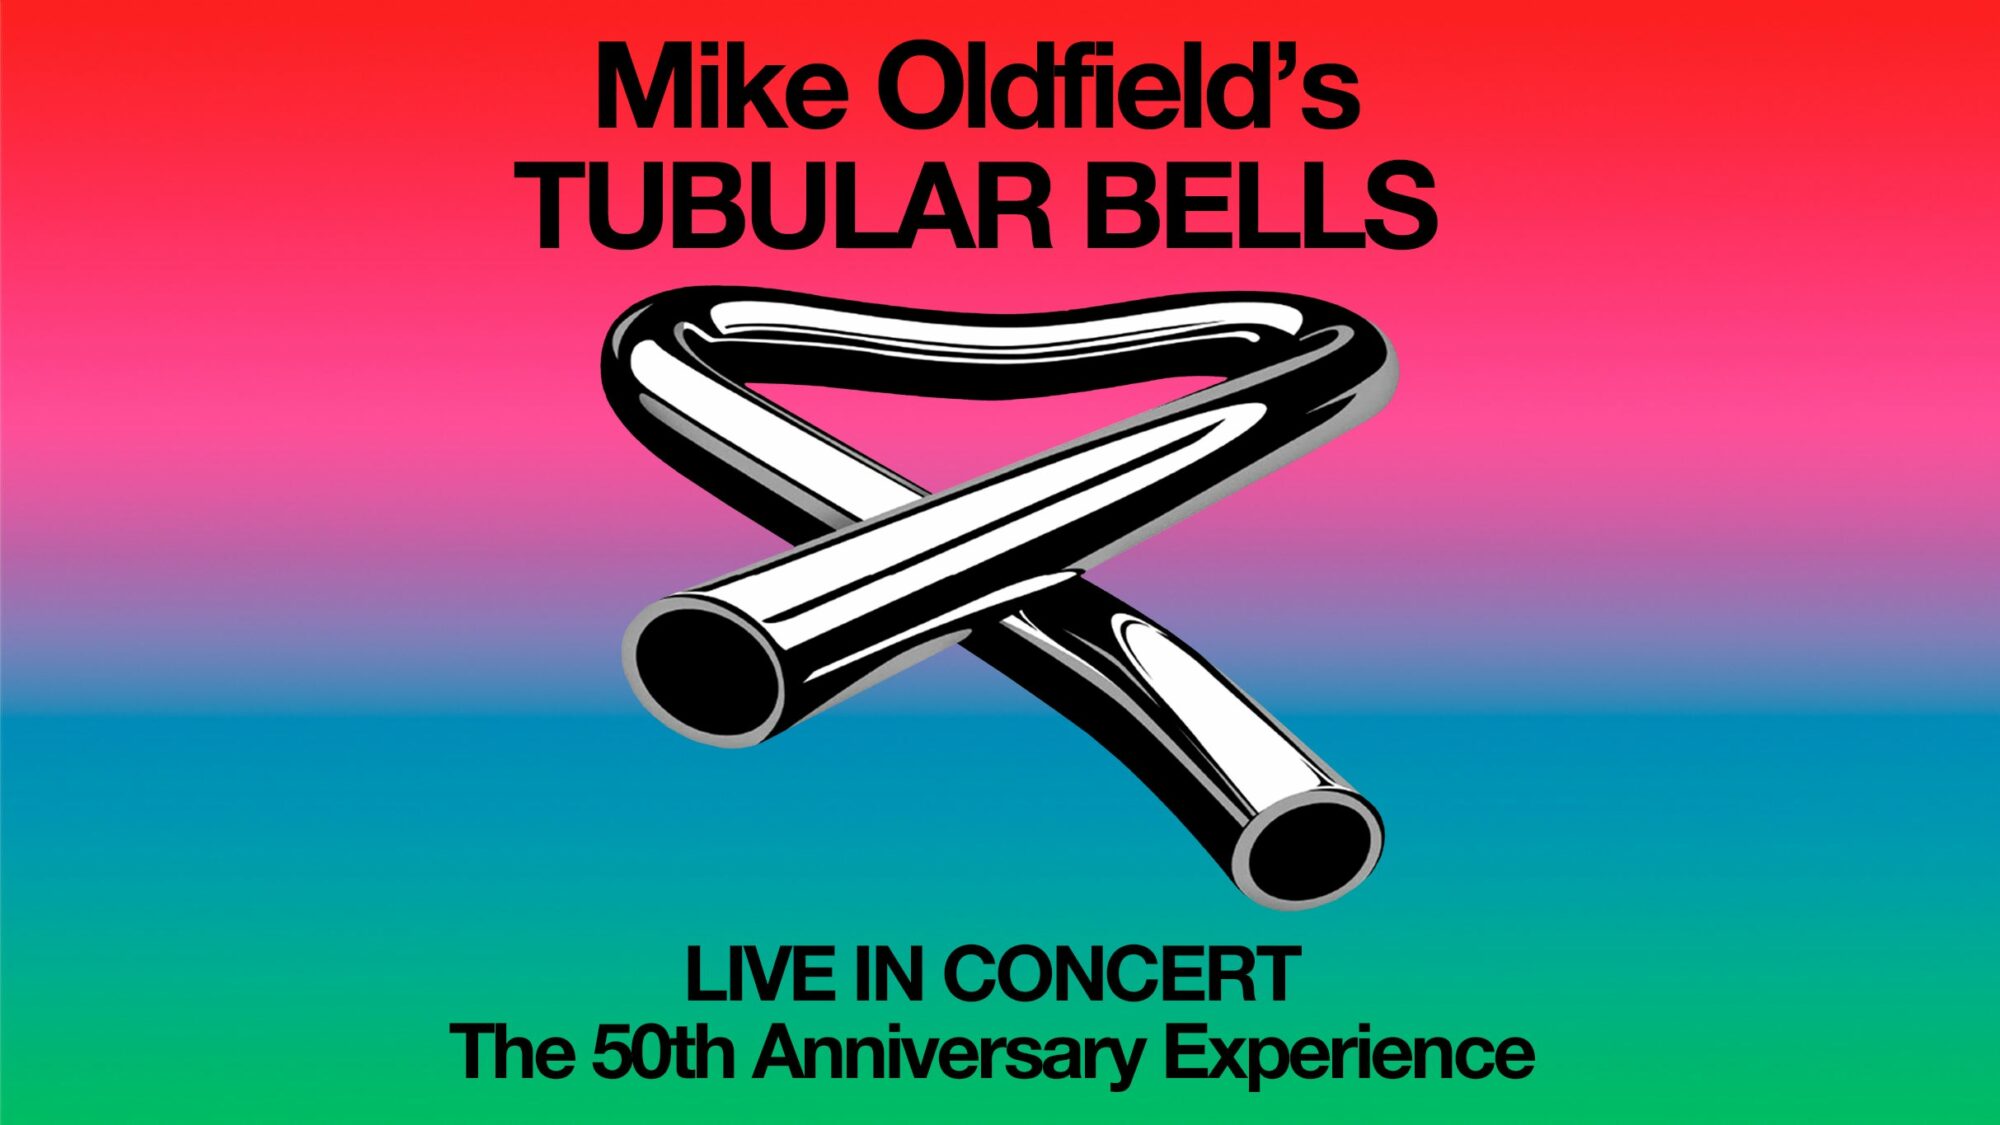 Image name Mike Oldfields Tubular Bells 50th Anniversary Tour at Sheffield City Hall Oval Hall Sheffield the 4 image from the post Mike Oldfield's Tubular Bells: 50th Anniversary Tour at Sheffield City Hall Oval Hall, Sheffield in Yorkshire.com.